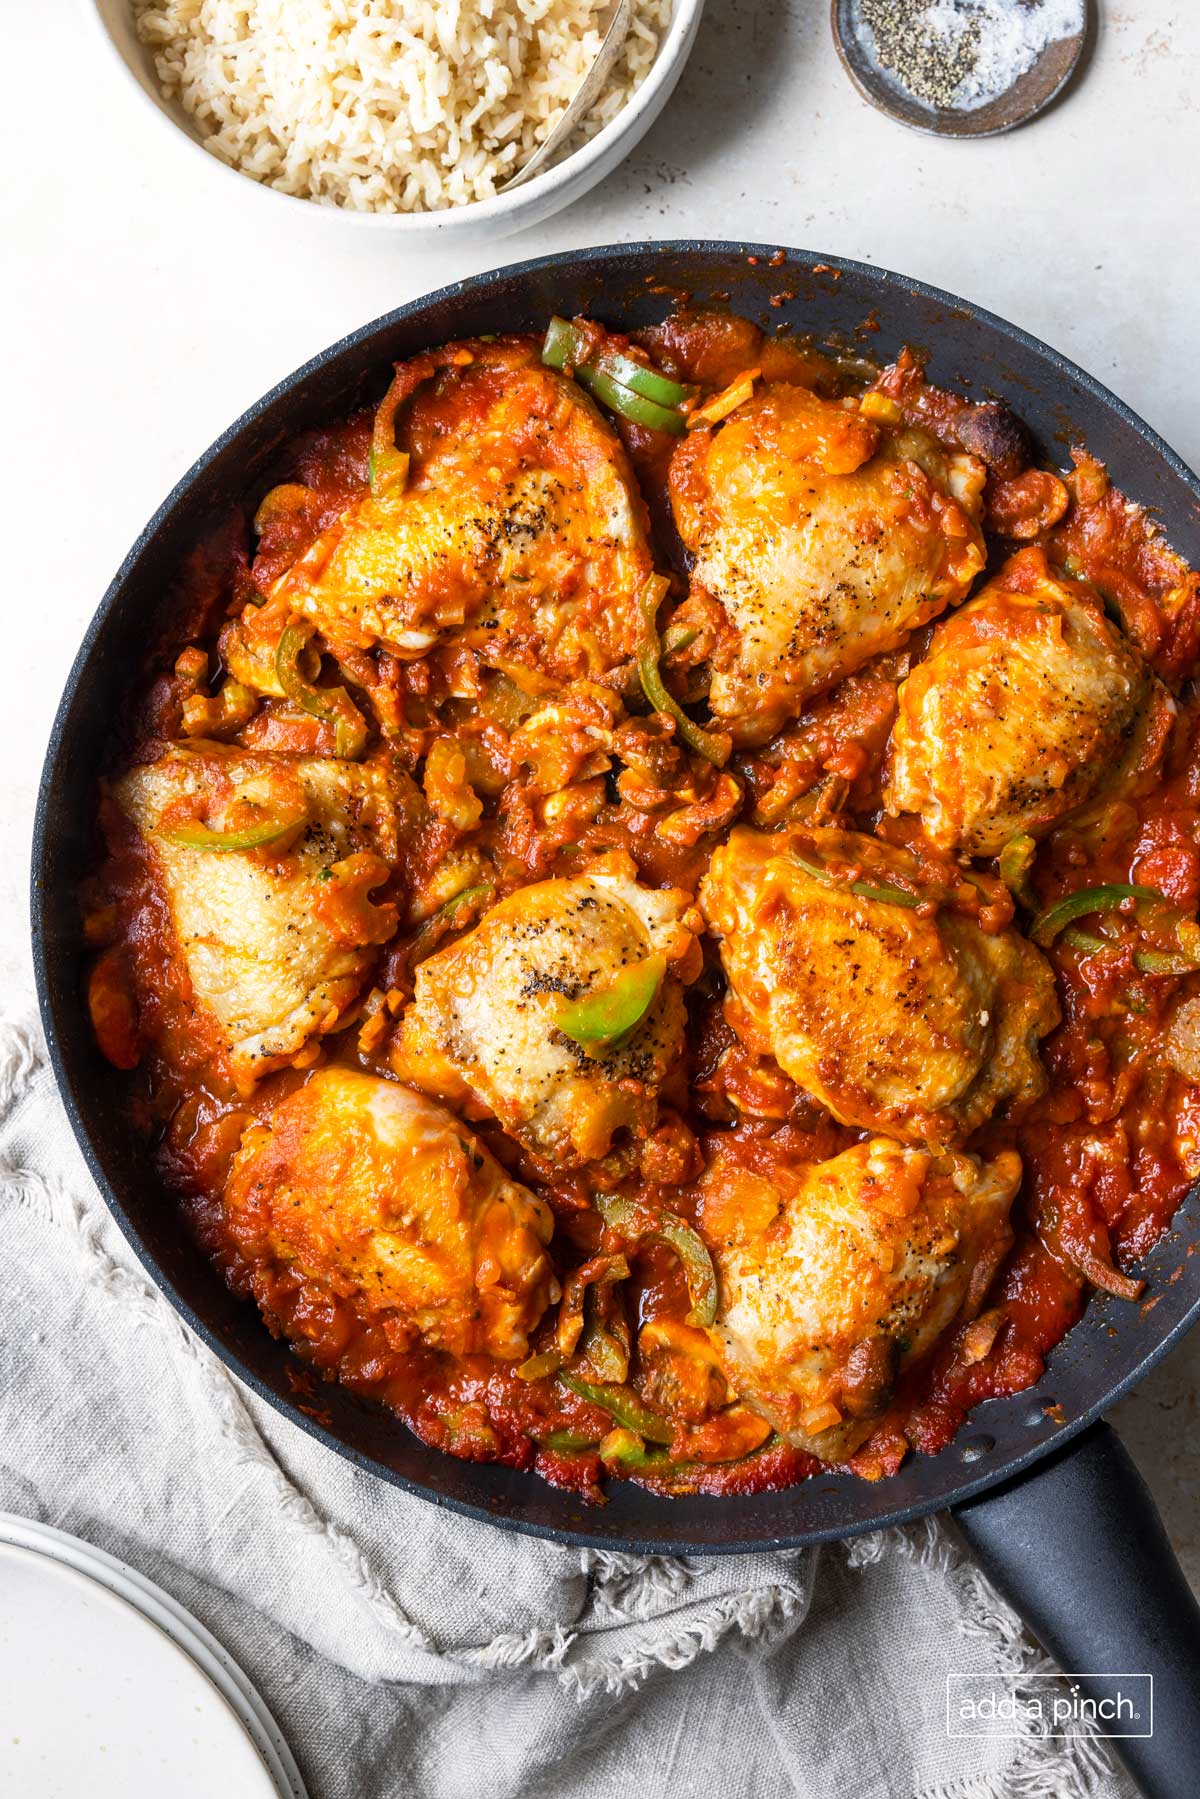 Photograph of chicken cacciatore in a skillet with rice and seasonings in the background ready to serve.